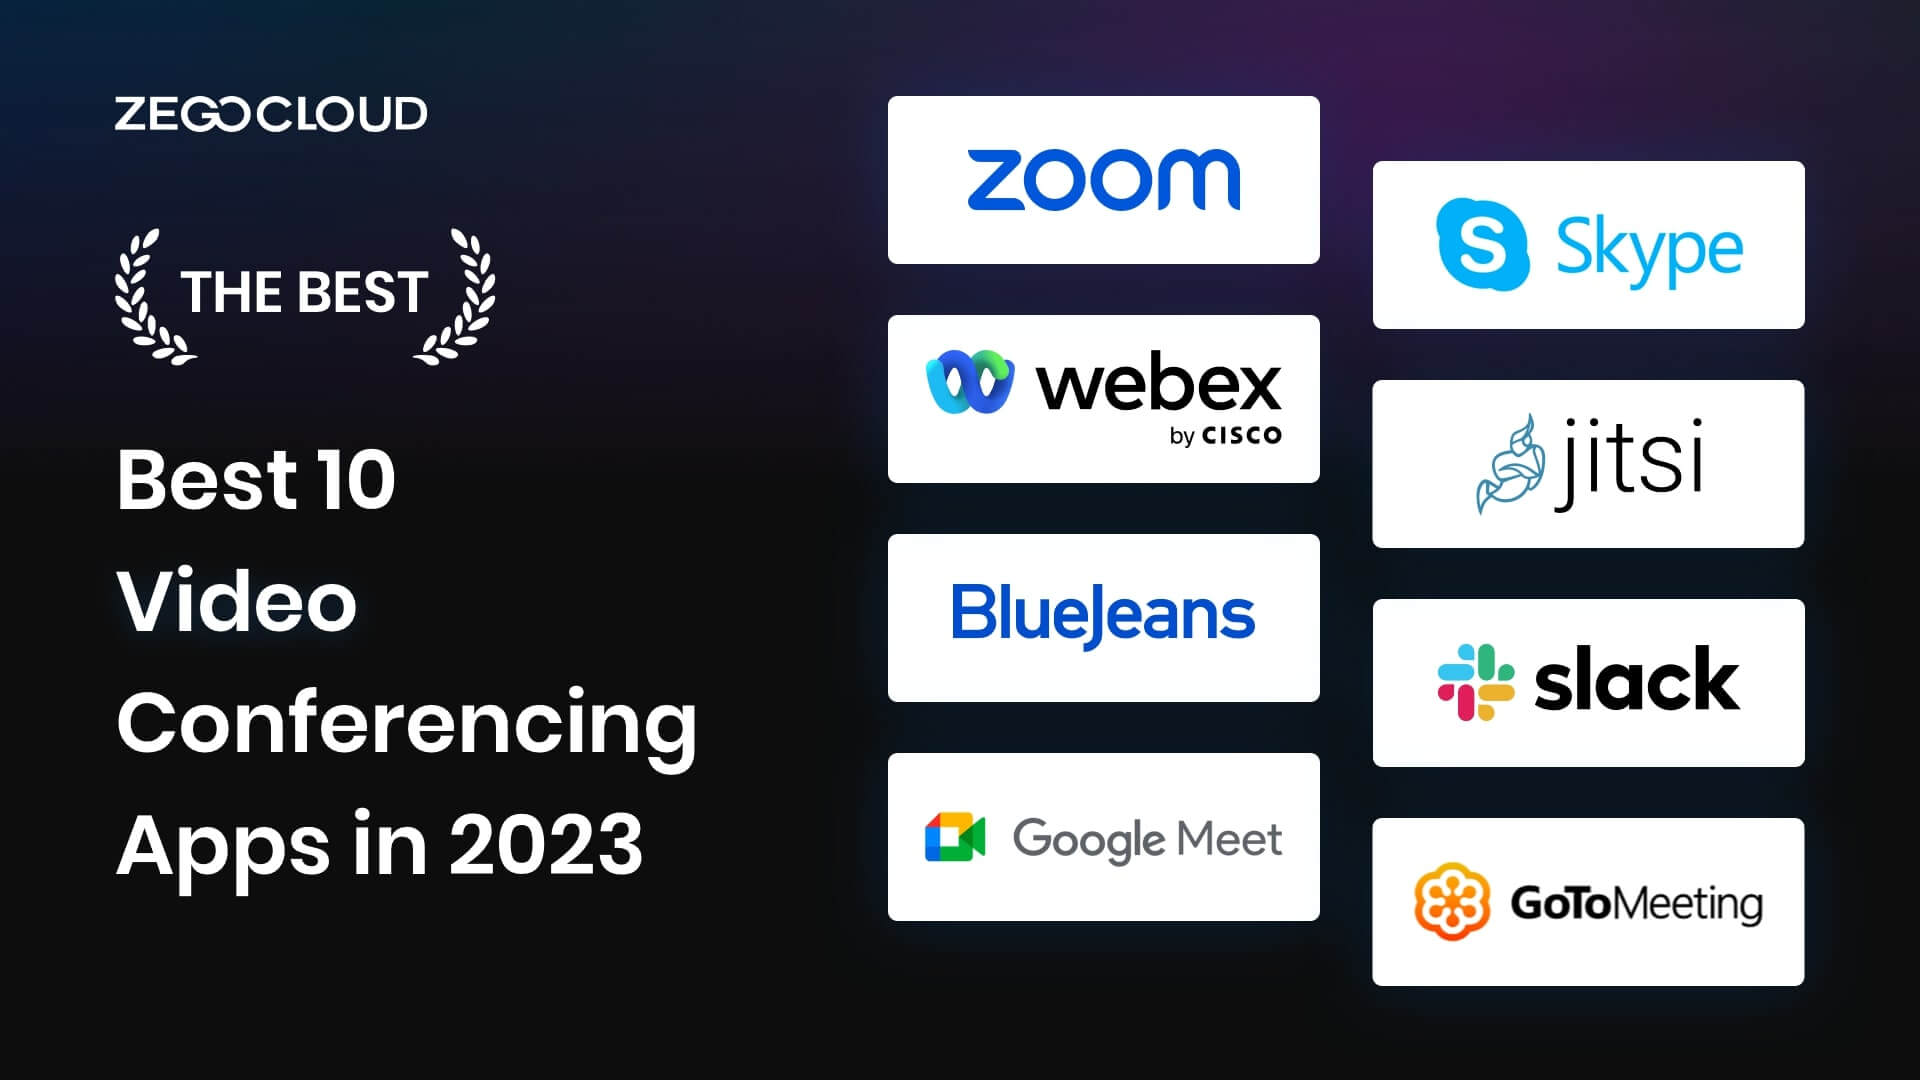 Best 10 Video Conferencing Apps in 2023